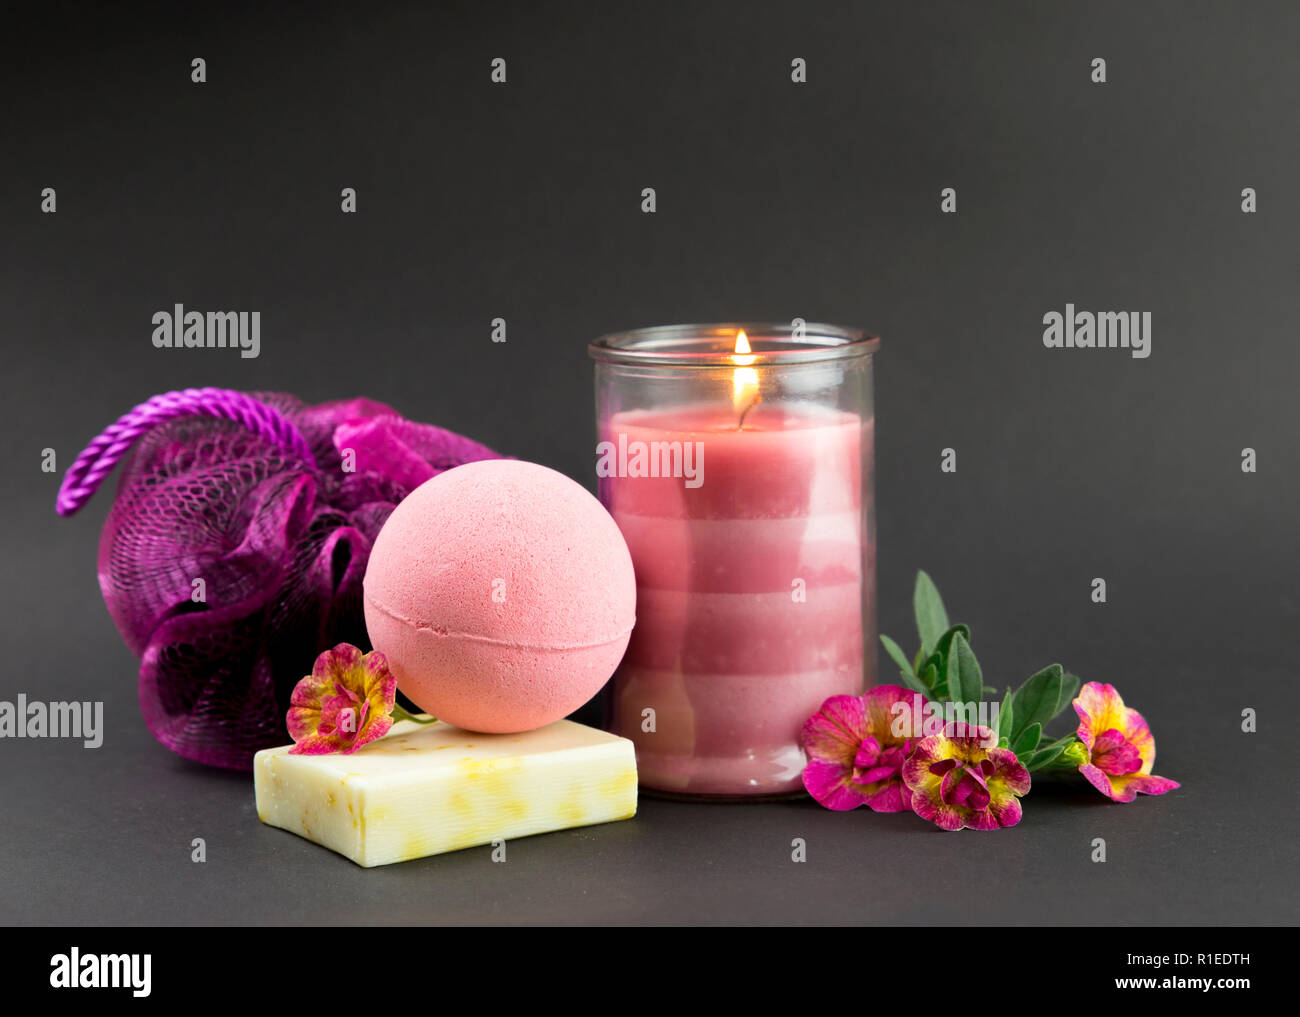 Wellness spa therapy pampering products on black background, pink candle burning, warm mood. Pink bath bomb, hand made soap, pink sponge, pink burning Stock Photo